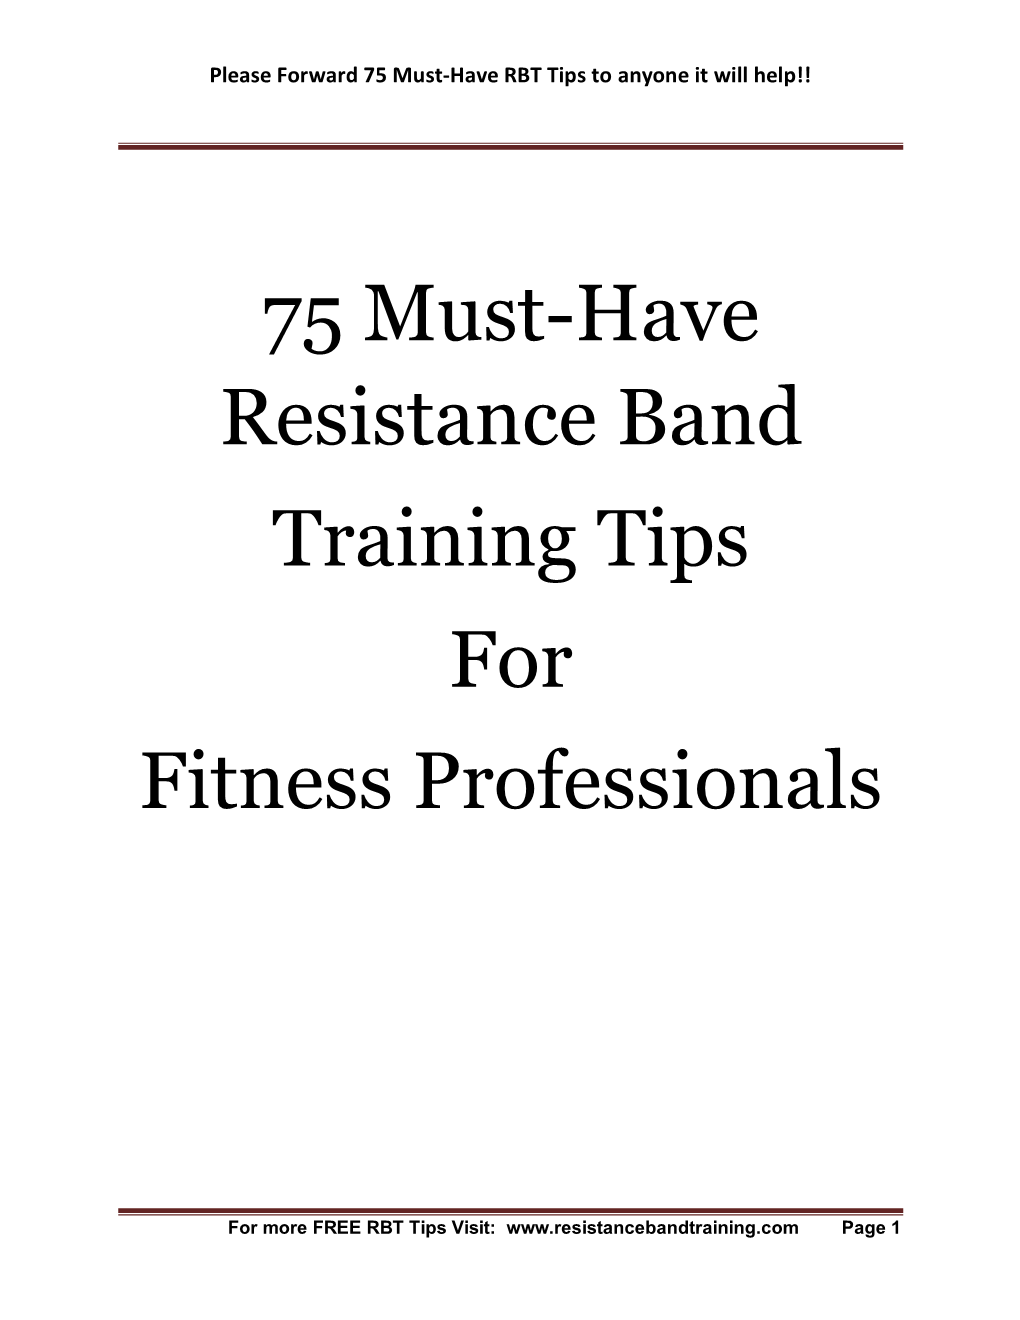 75 Must-Have Resistance Band Training Tips for Fitness Professionals